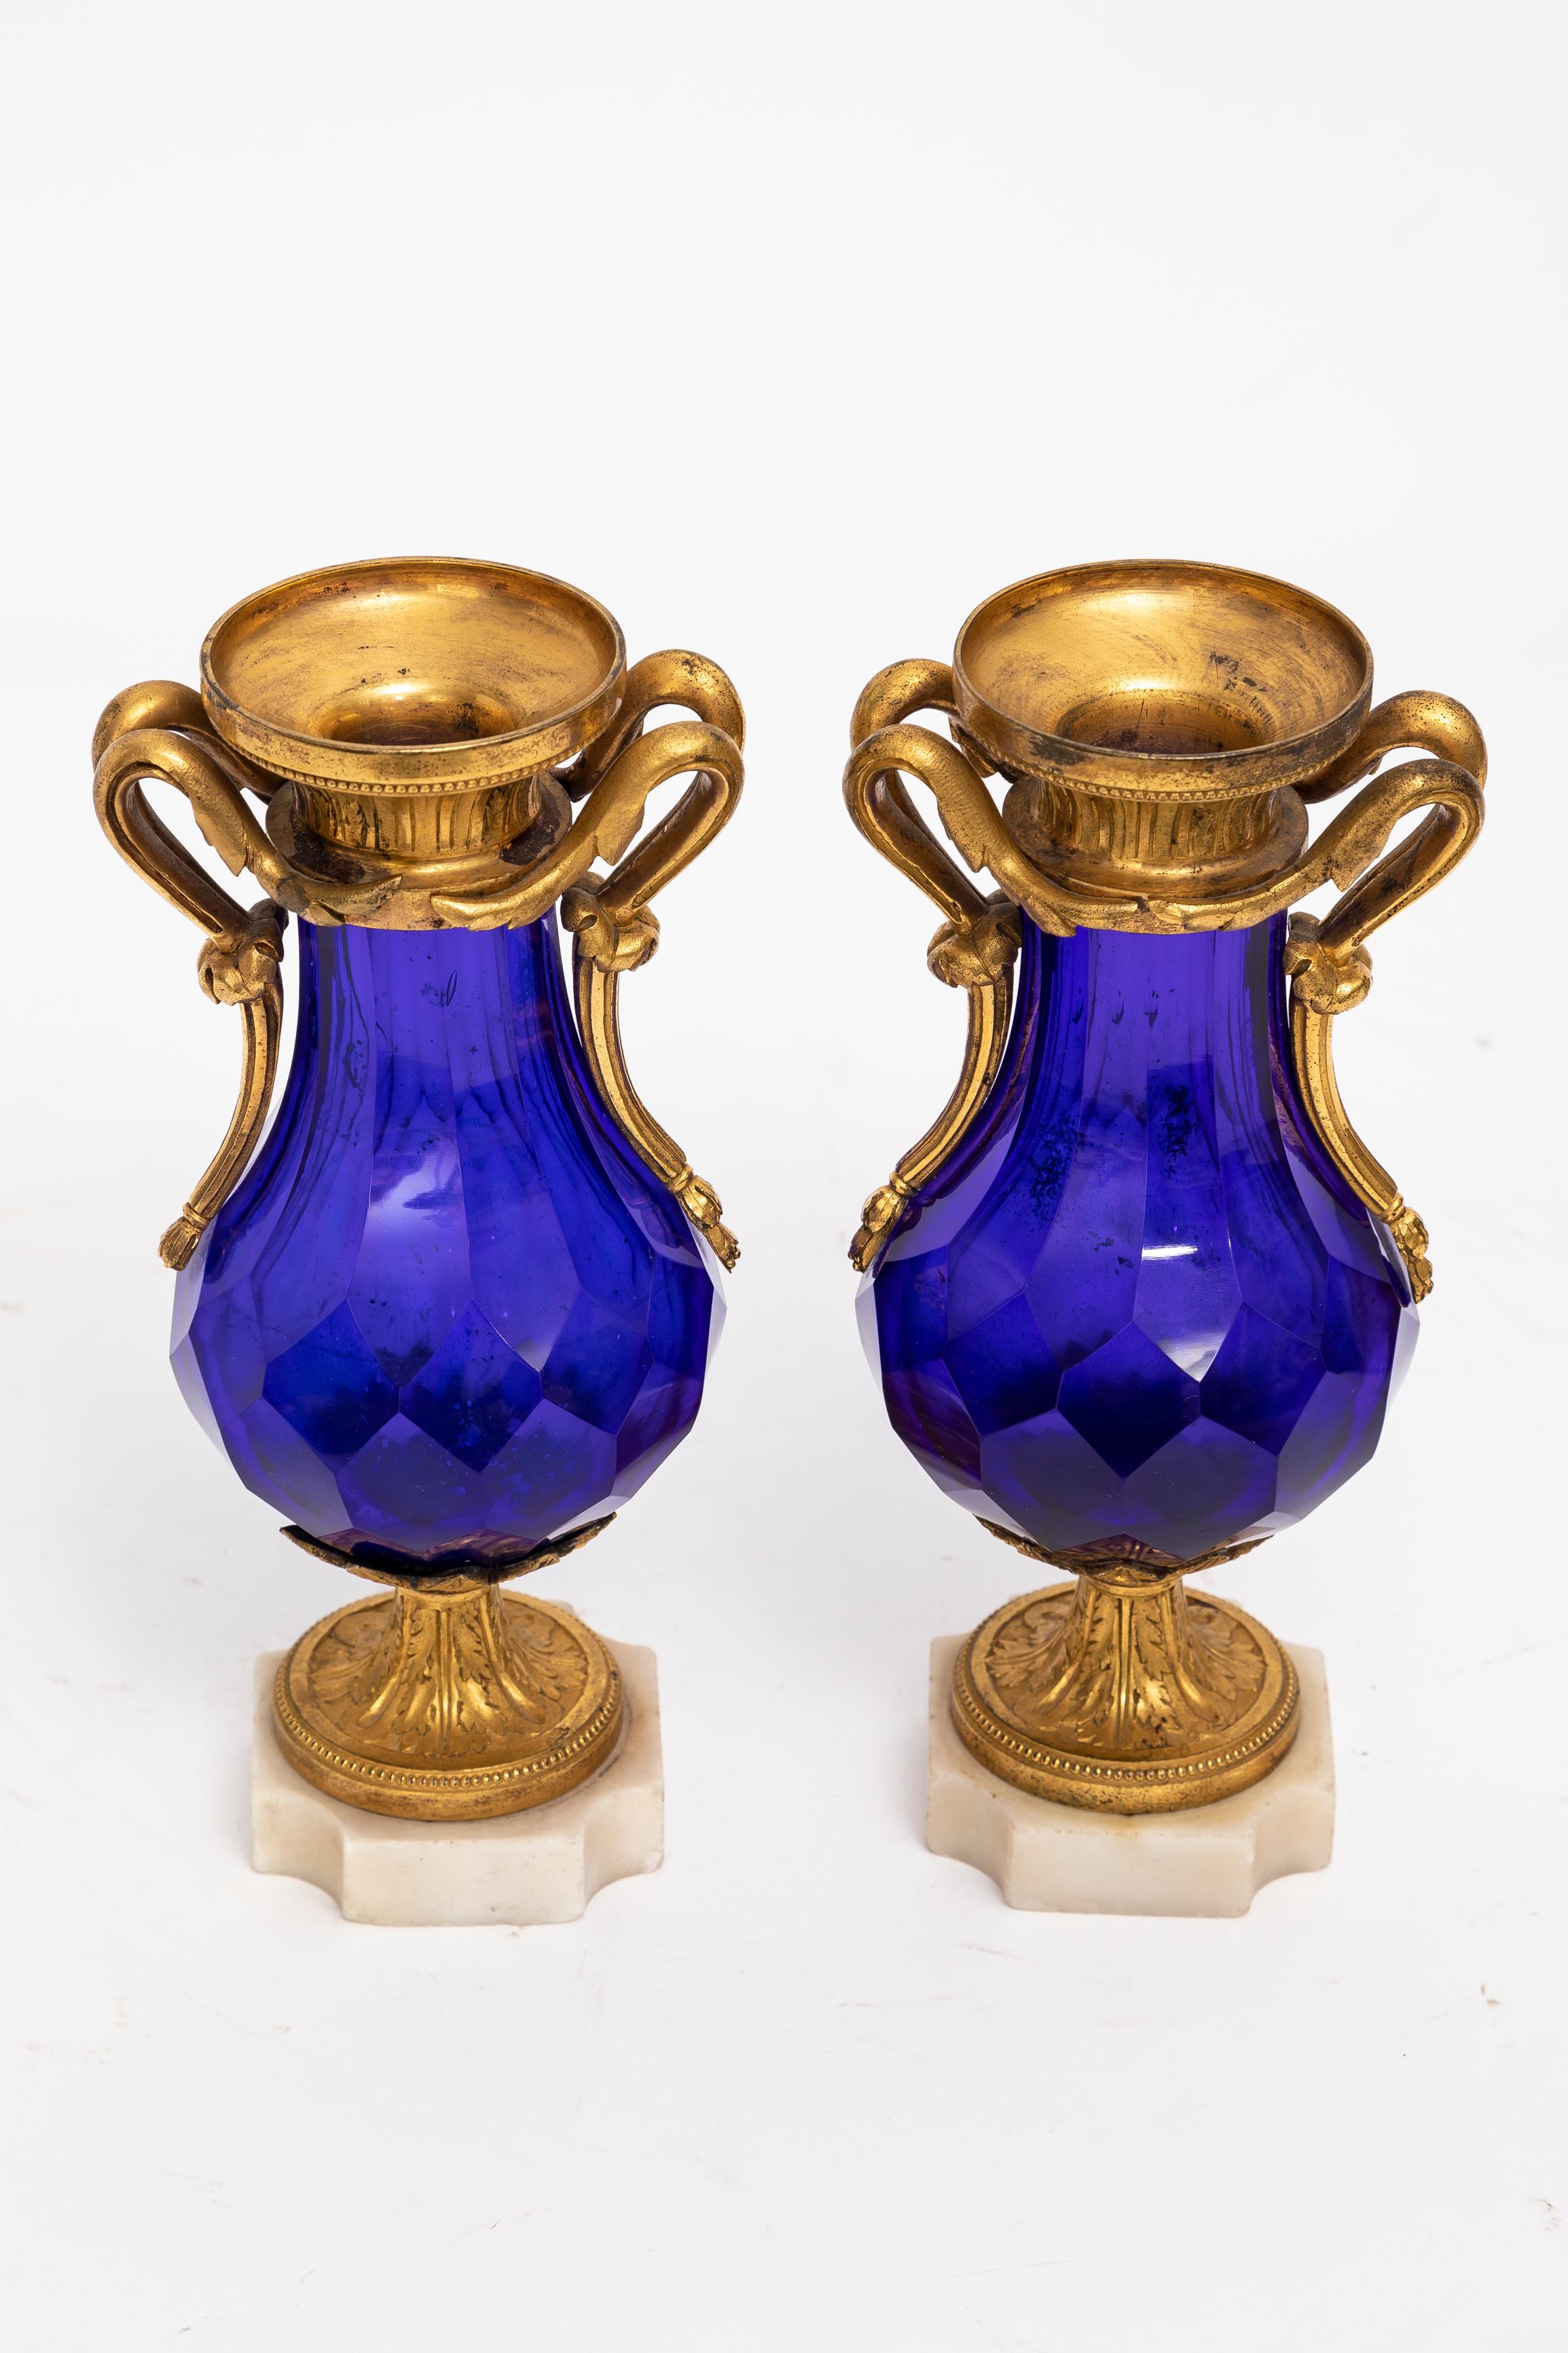 Gilt Pair 18 C. Russian Cobalt Blue Crystal & Ormolu Mounted Vases w/ Marble Bases For Sale